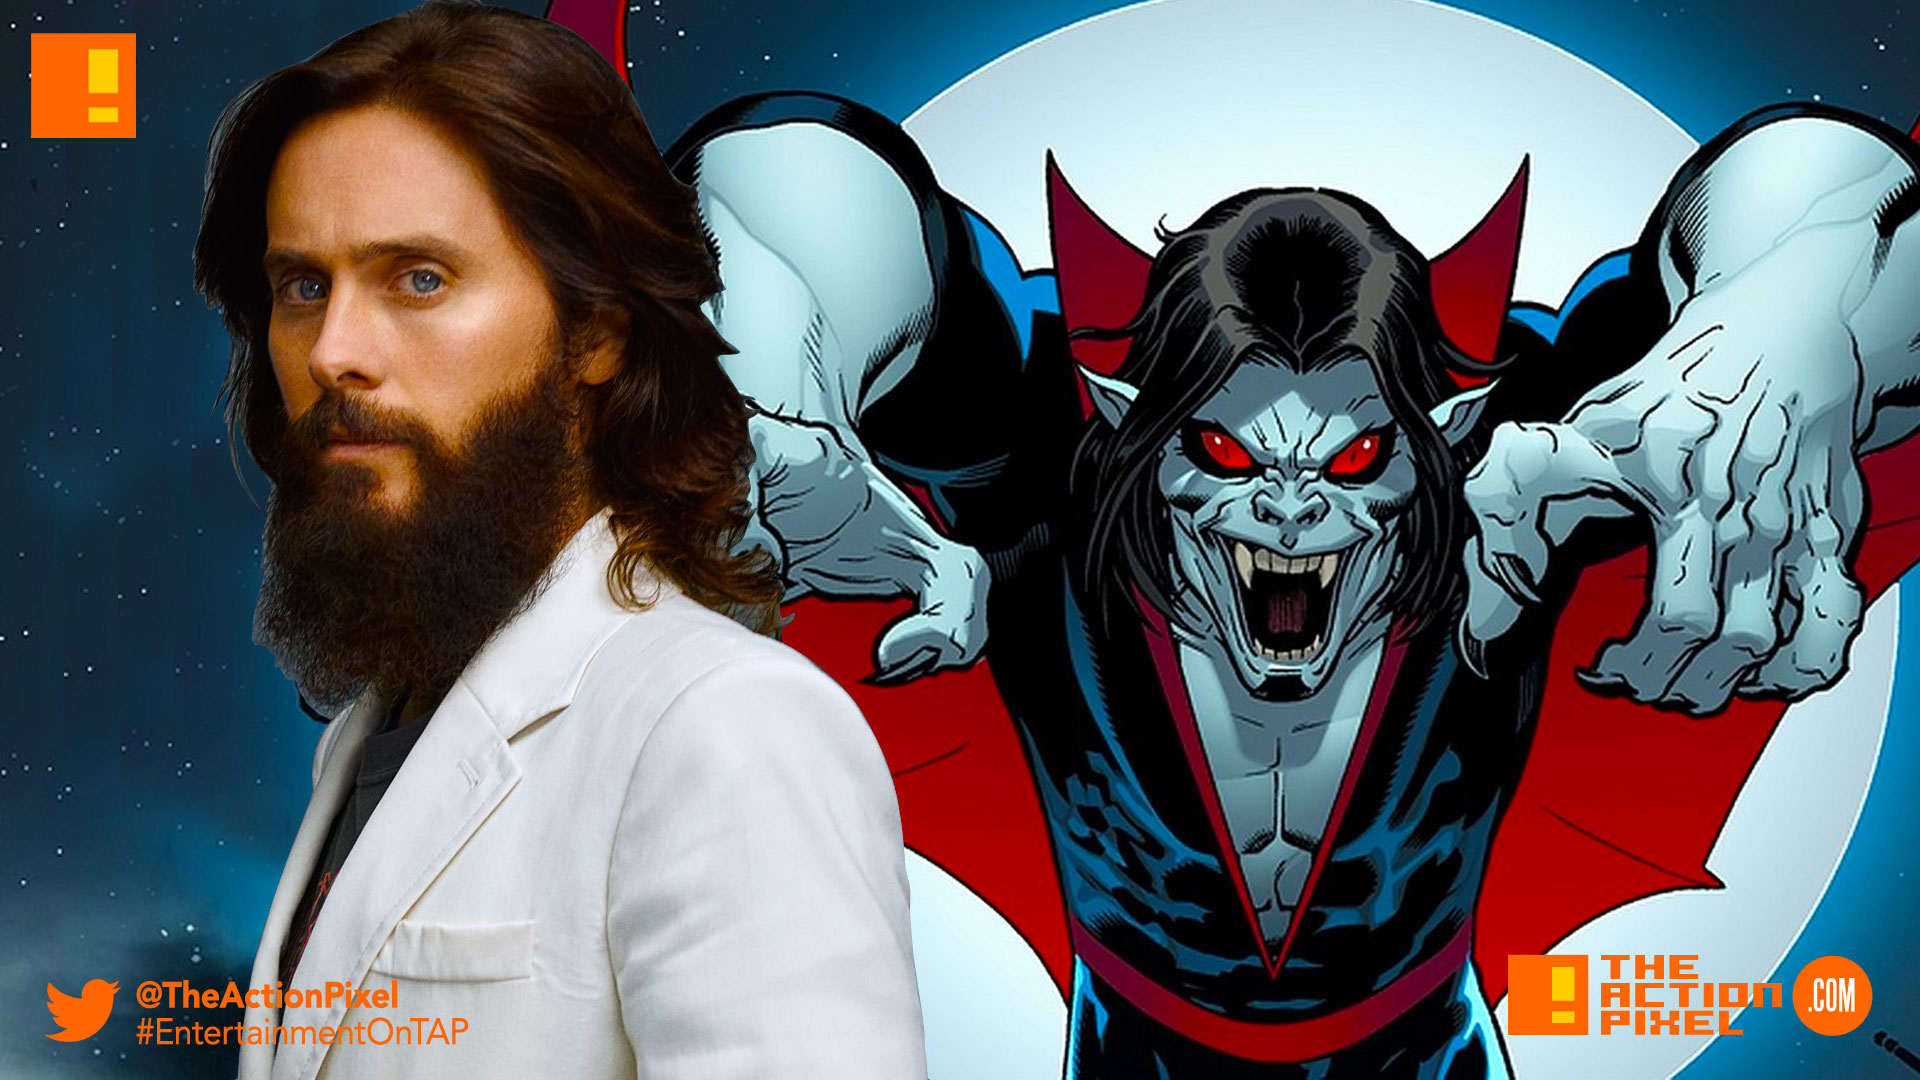 jared leto, morbius, spider-man, sony pictures, sony, marvel comics, marvel, morbius, sony, marvel, spider-man, spider man, morbius the living vampire, vampire, plasma, blood, marvel comics, marvel entertainment,the action pixel, entertainment on tap,